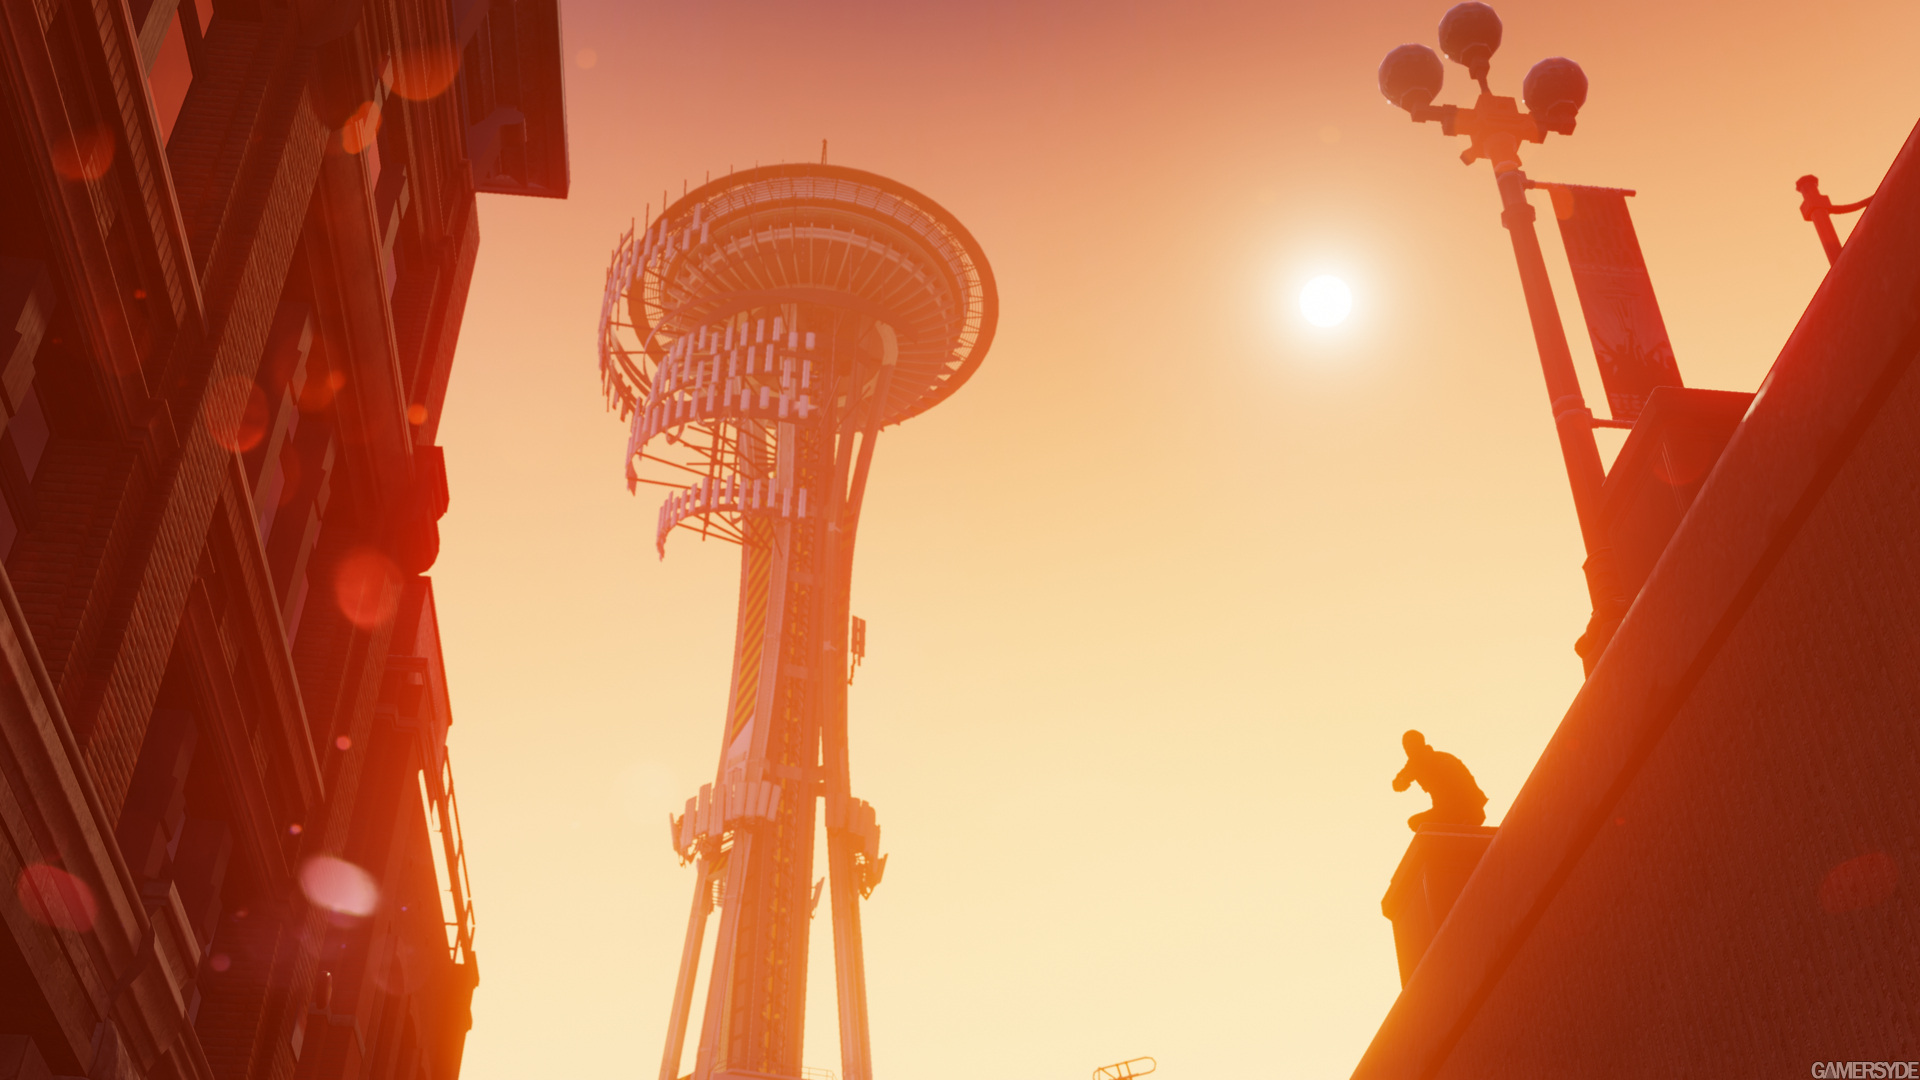 image_infamous_second_son-22309-2661_0006.jpg